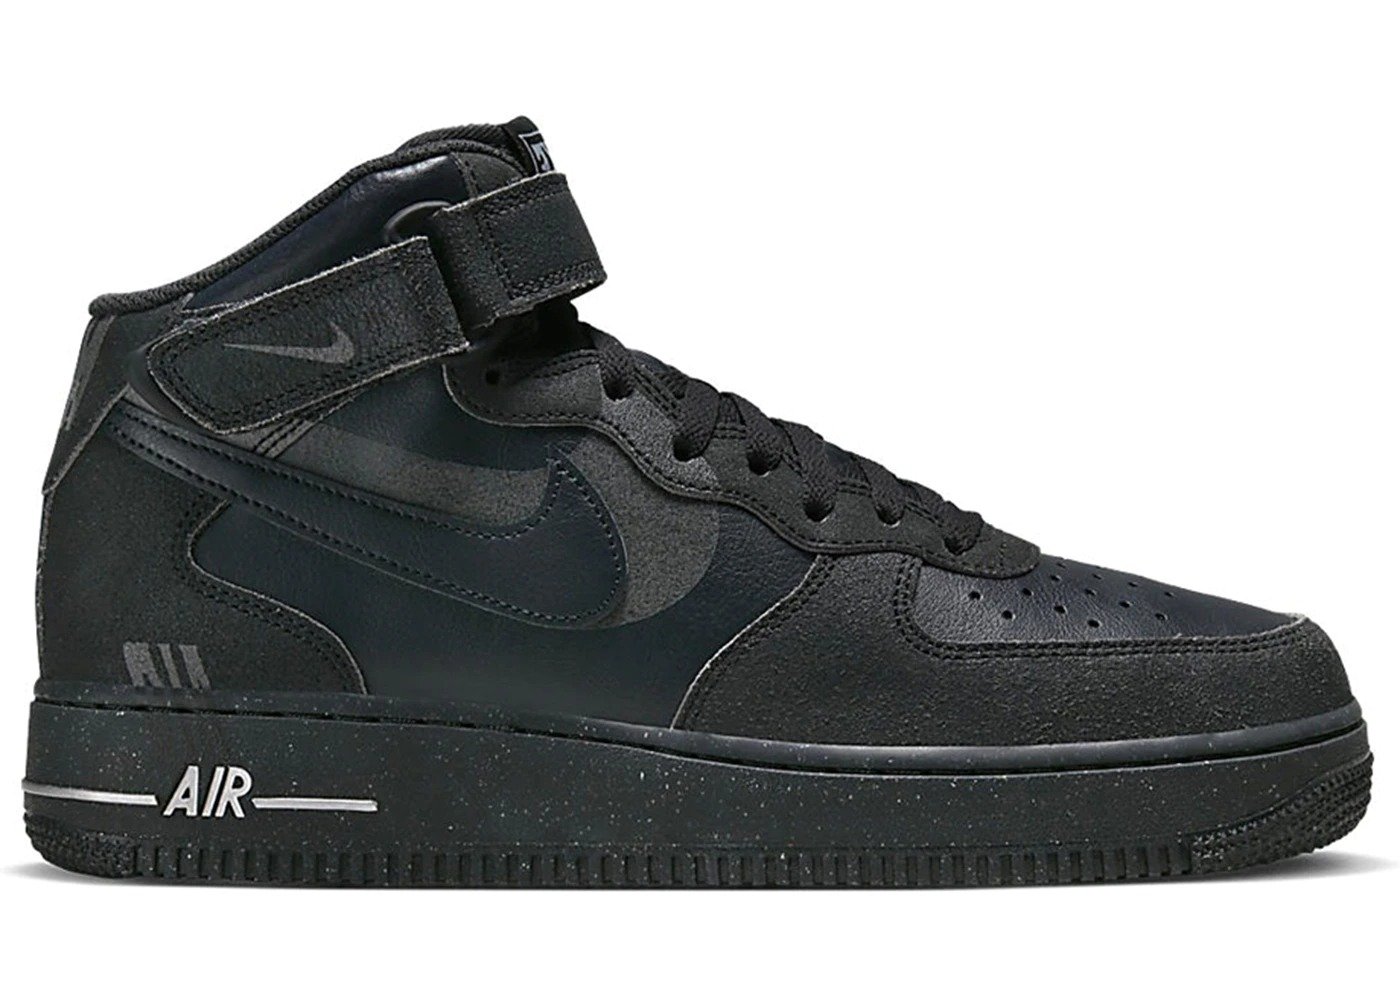 Now Available: Nike Air Force 1 Mid LX 